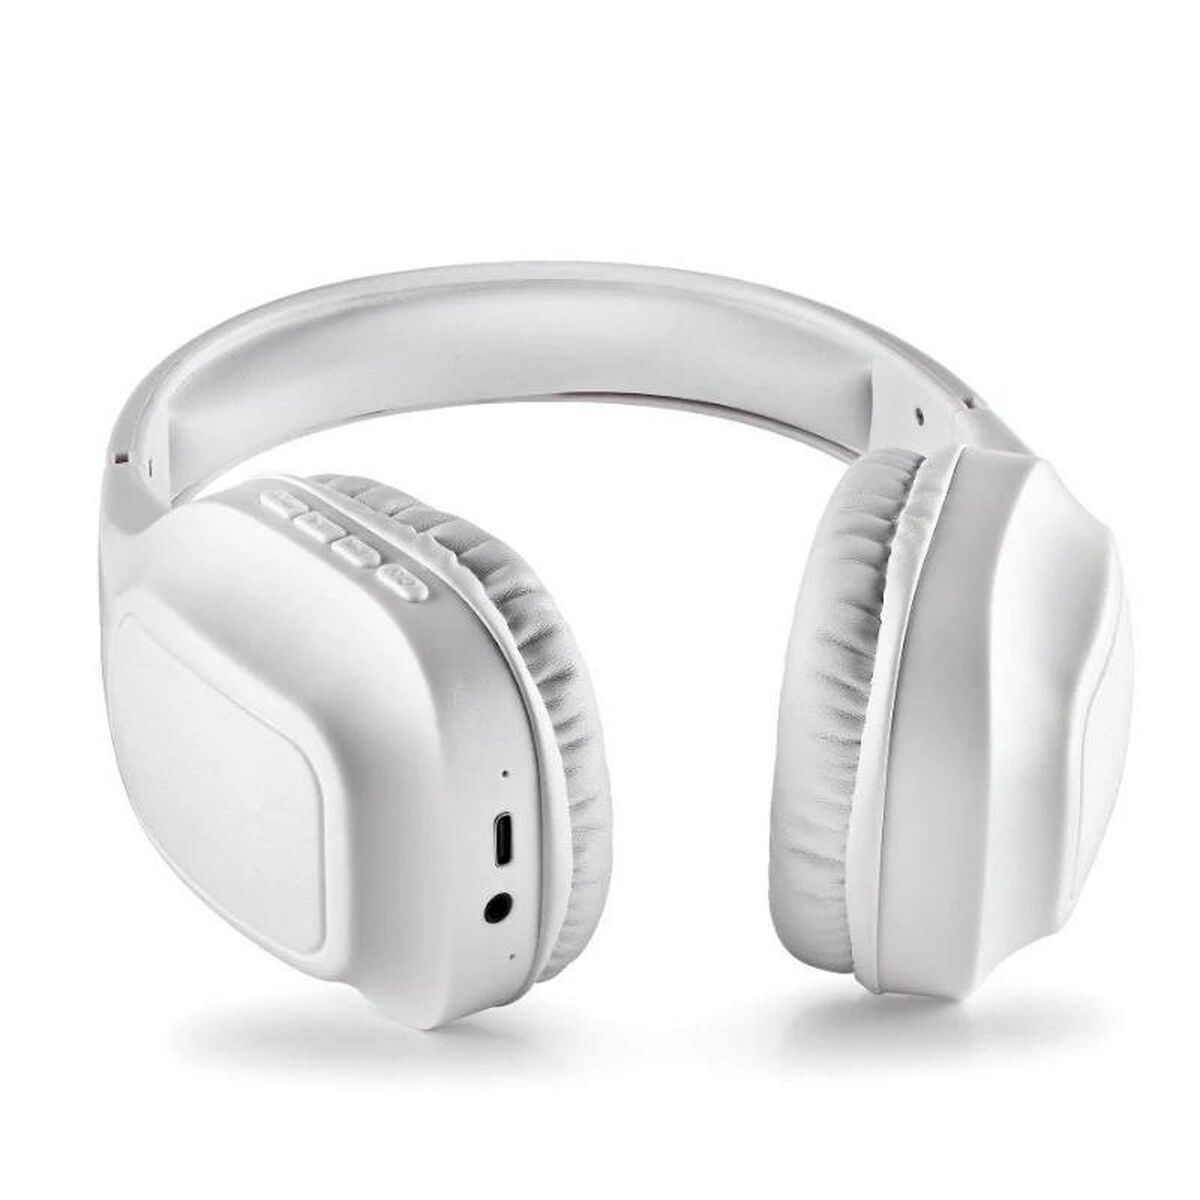 Headphones with Microphone NGS ARTICA WRATH White